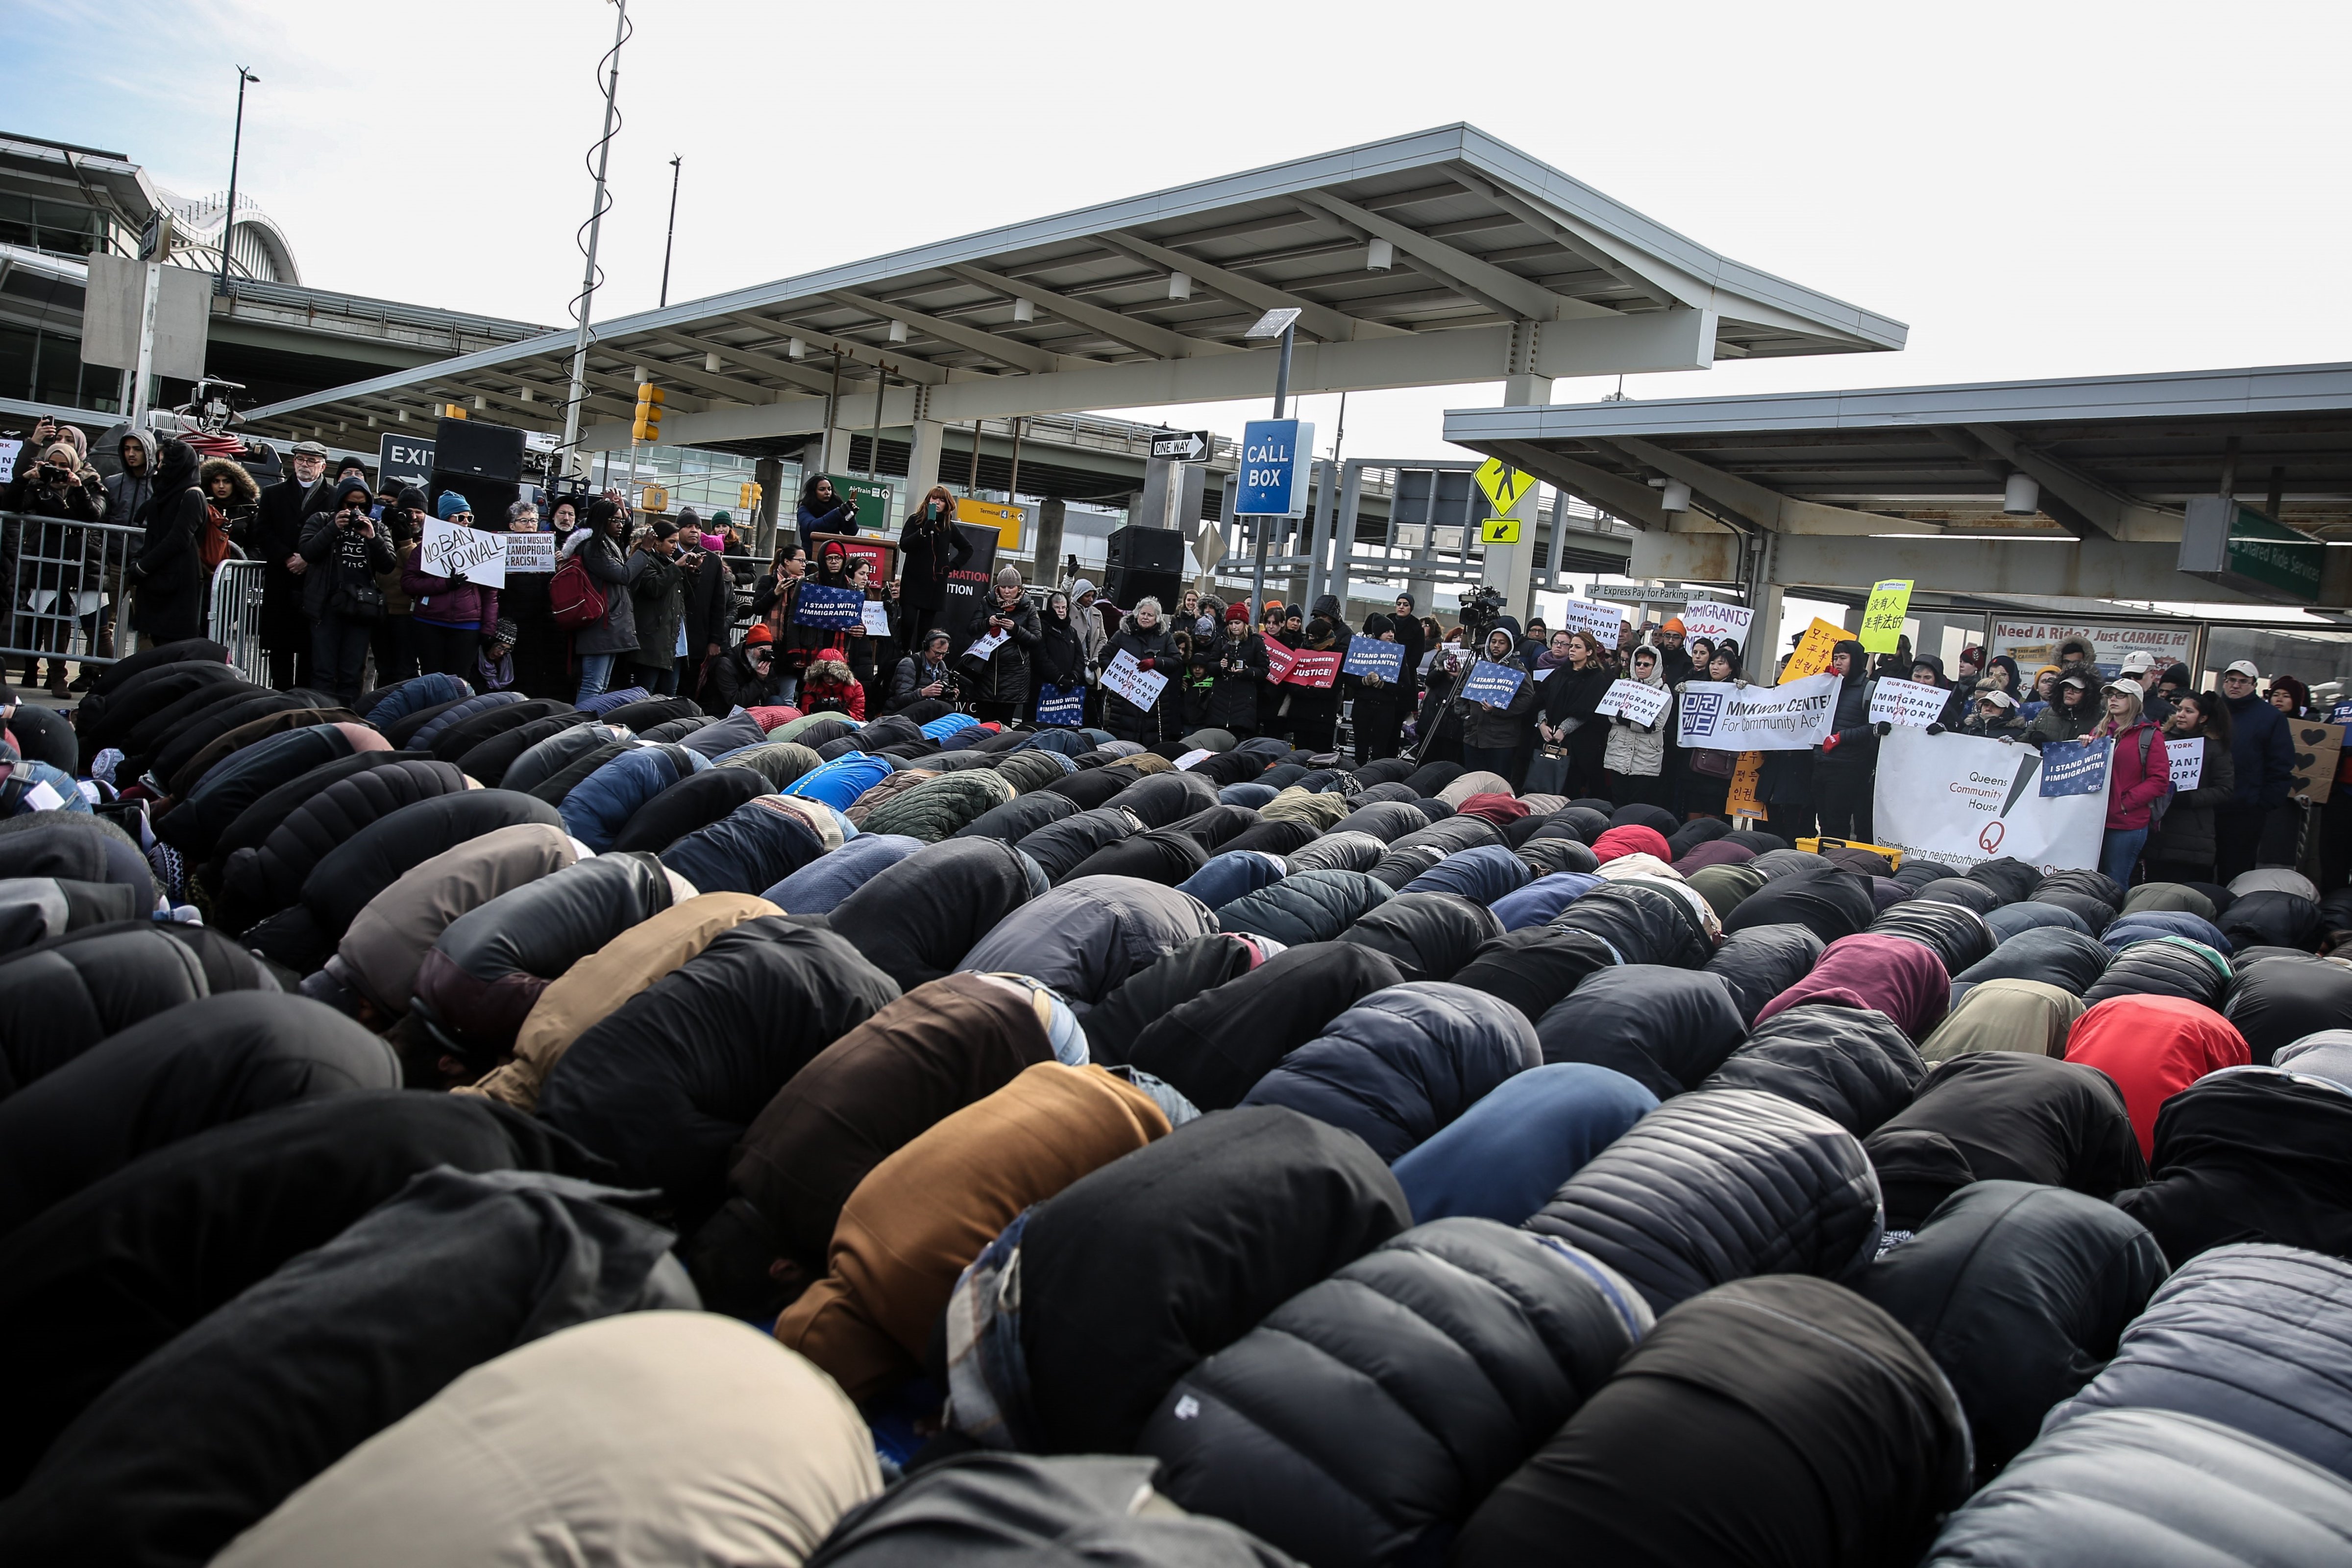 Muslim Americans perform Friday Prayer at JFK Airport as a protest against President Donald J. Trump's executive order banning entry of 7 Muslim-majority countries of admission and visas for 90 days in Queens borough of New York, NY, on Feb. 3, 2017. (Mohammed Elshamy—Anadolu Agency/Getty Images)